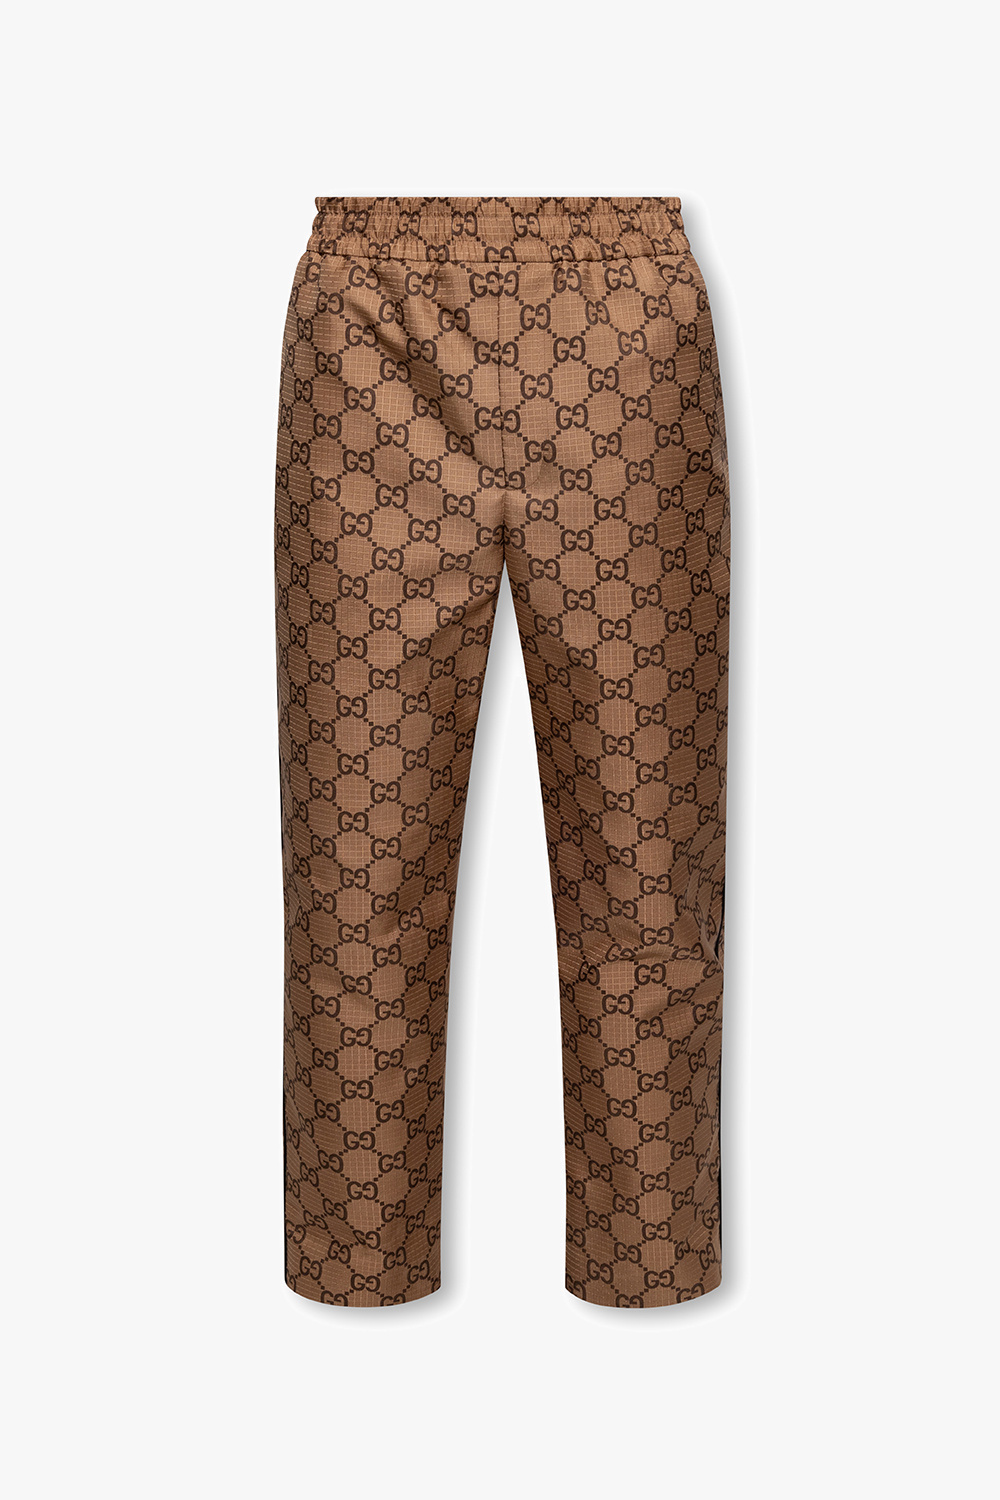 Gucci Trousers with monogram | Men's Clothing | Vitkac